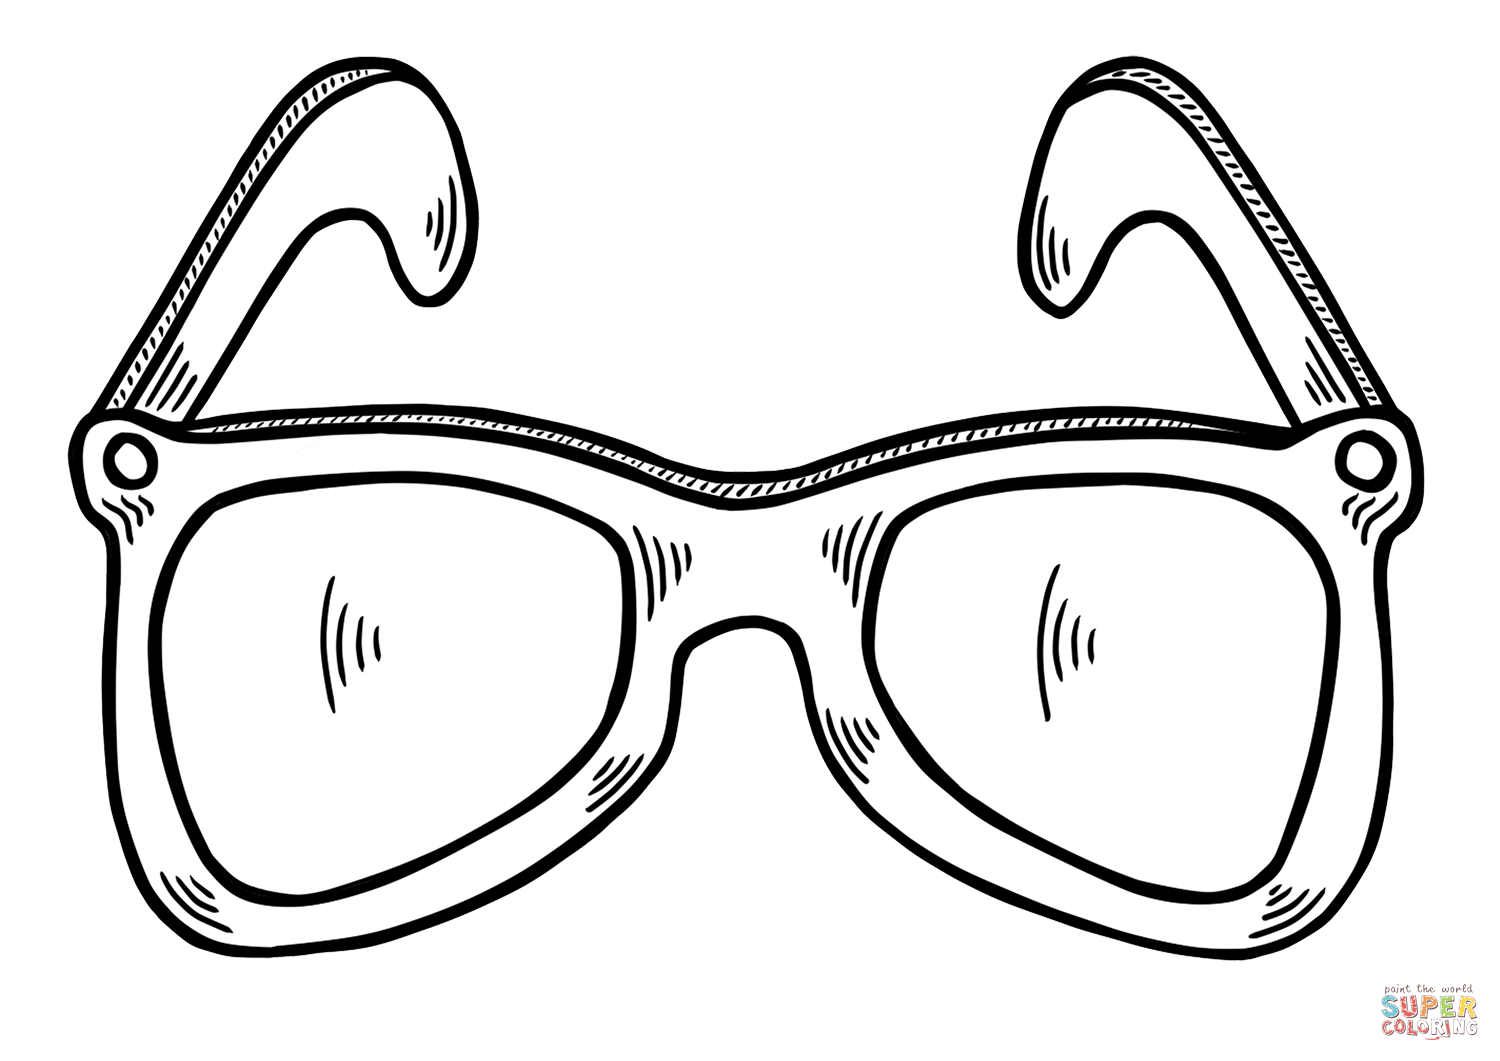 Sunglasses coloring page free printable coloring pages